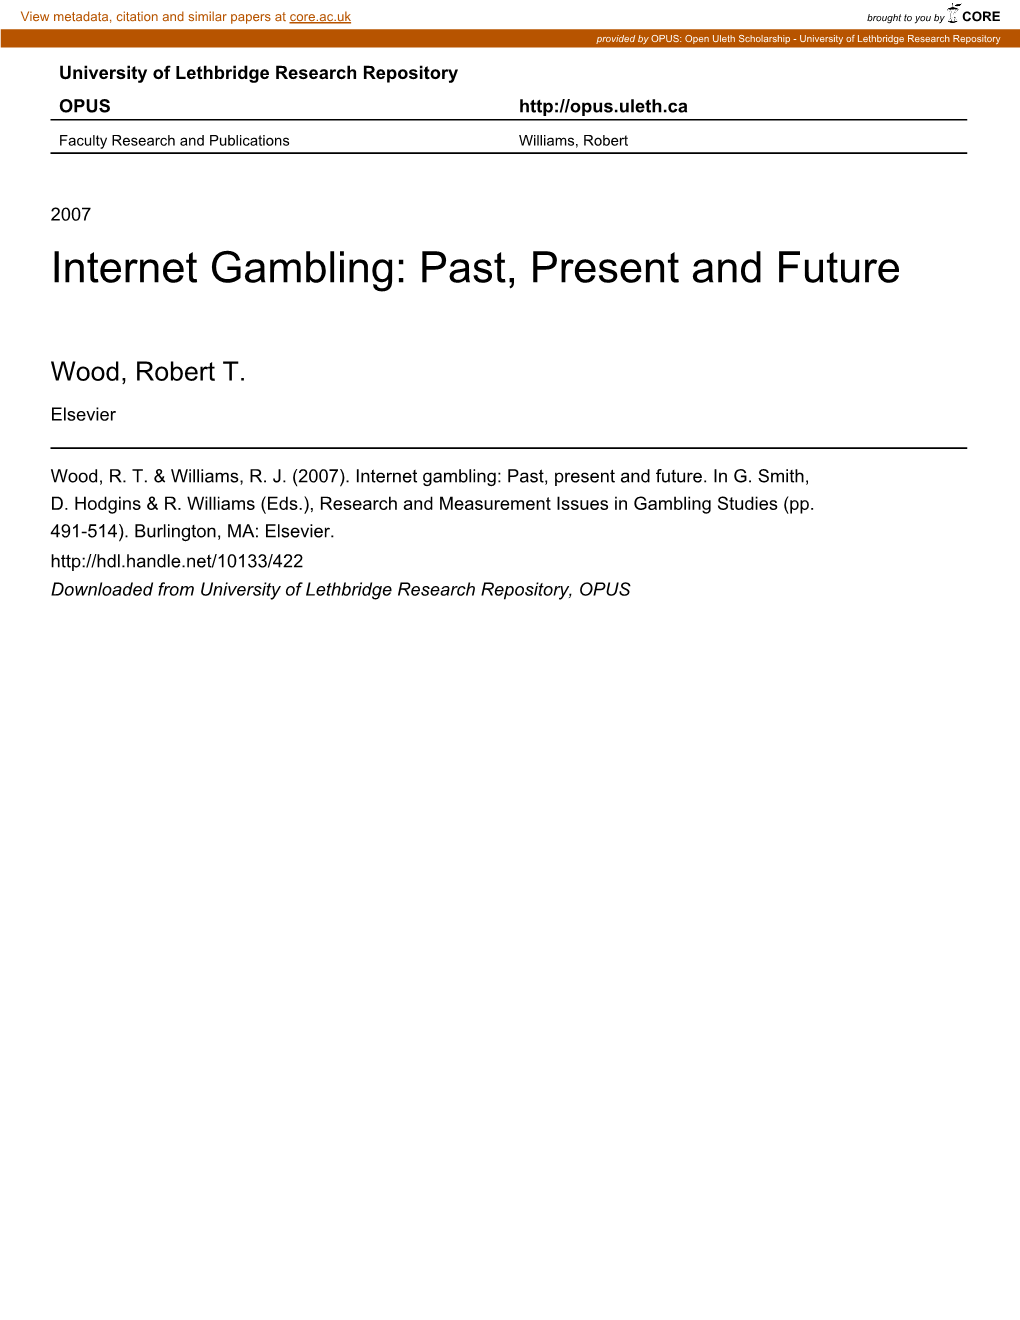 Internet Gambling: Past, Present and Future